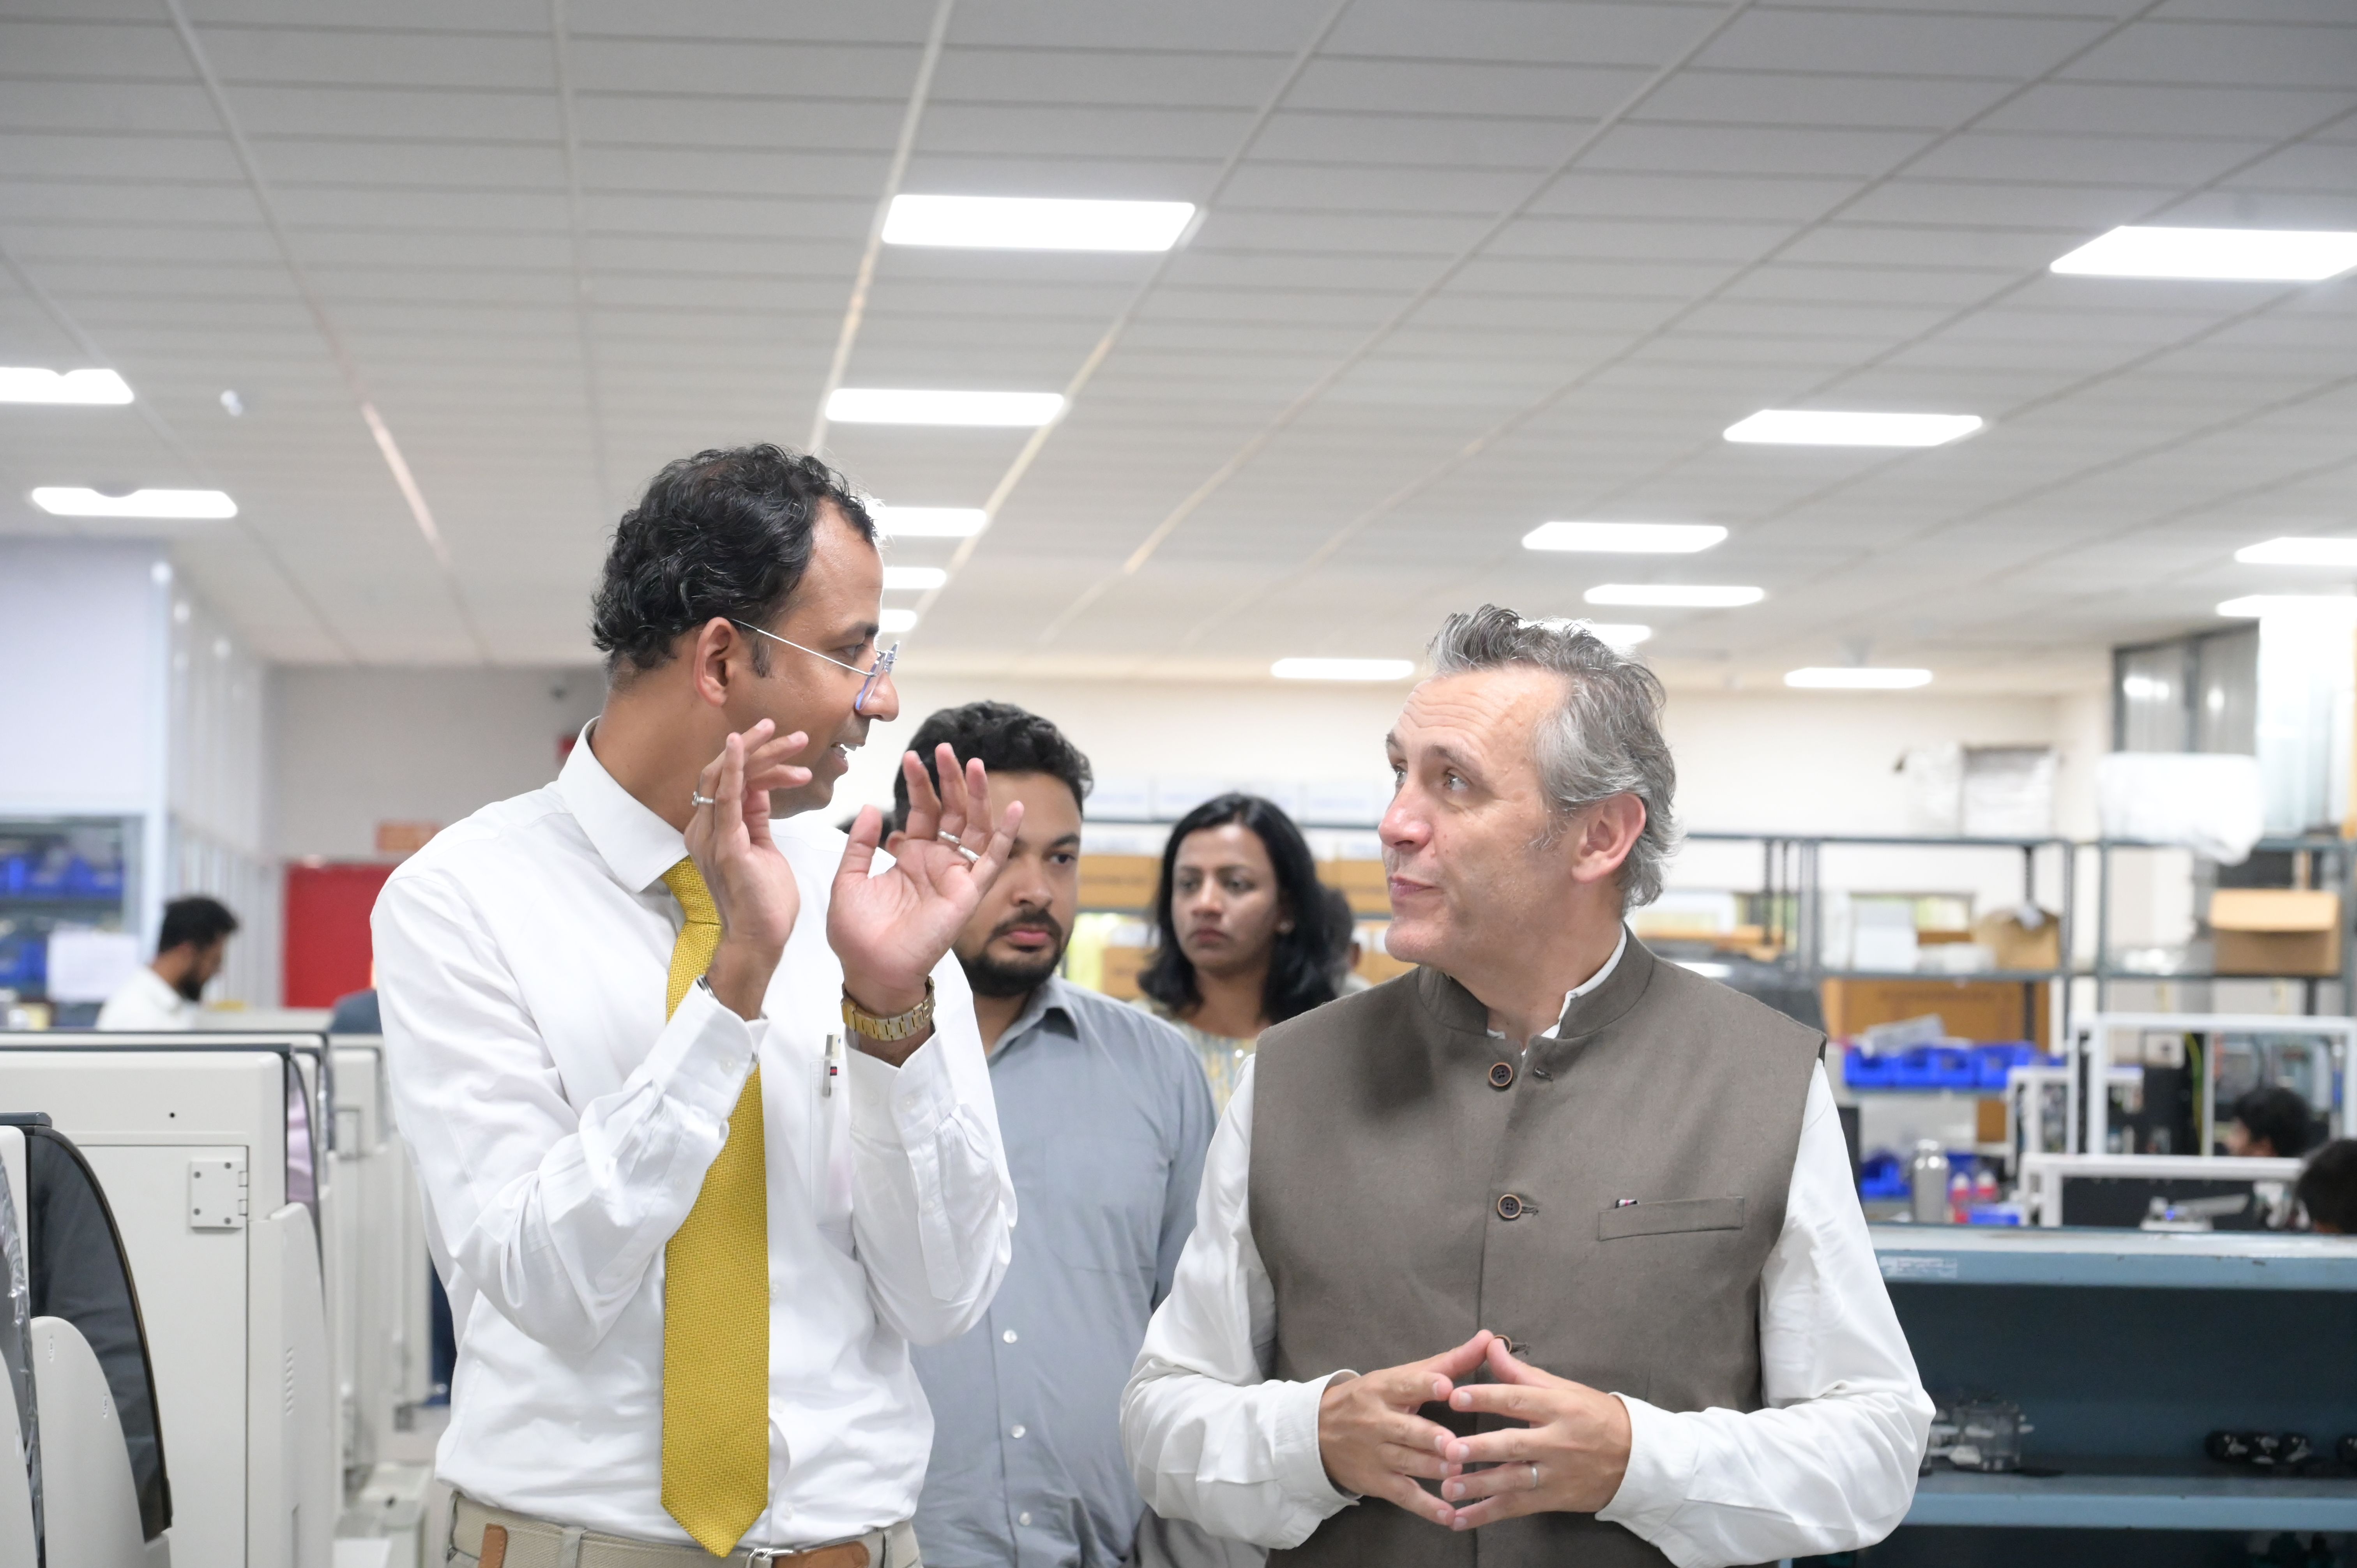 Dr. Jitendra Sharma, CEO-MD of AMTZ, met with the British Deputy High Commissioner at AMTZ to discuss healthcare technology and medical technology in India